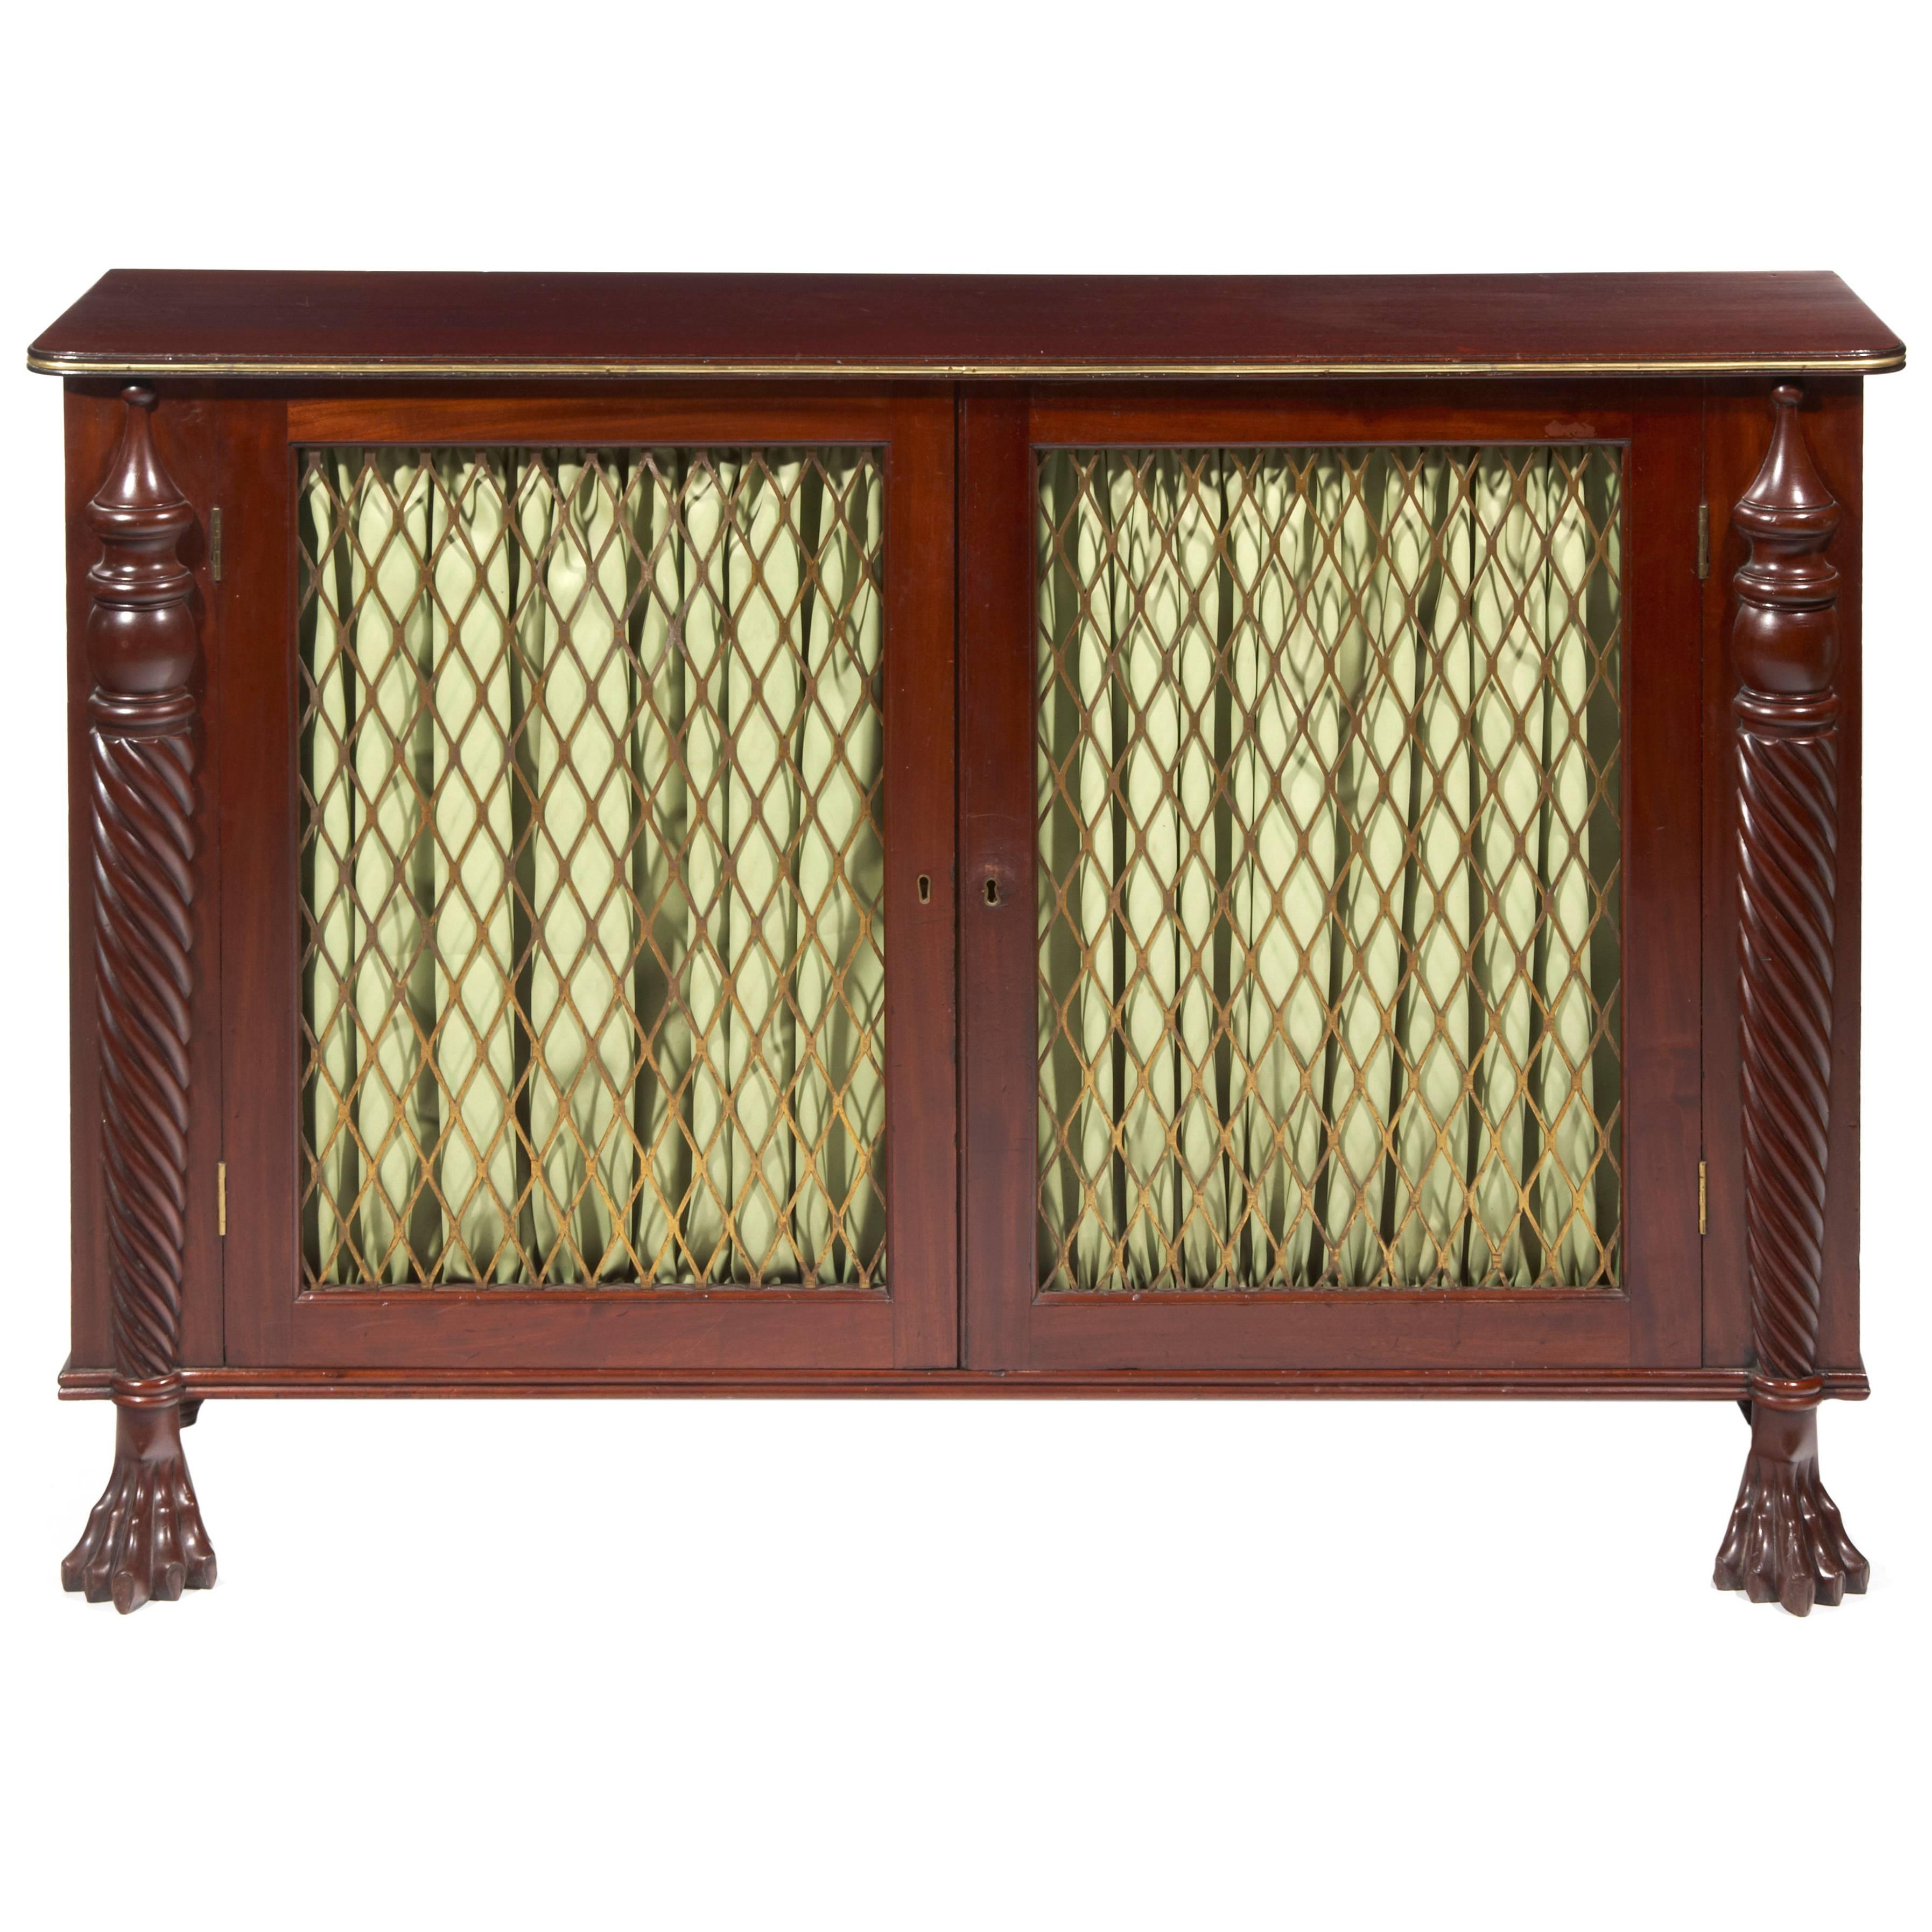 William IV Mahogany Brass Grill Cabinet For Sale